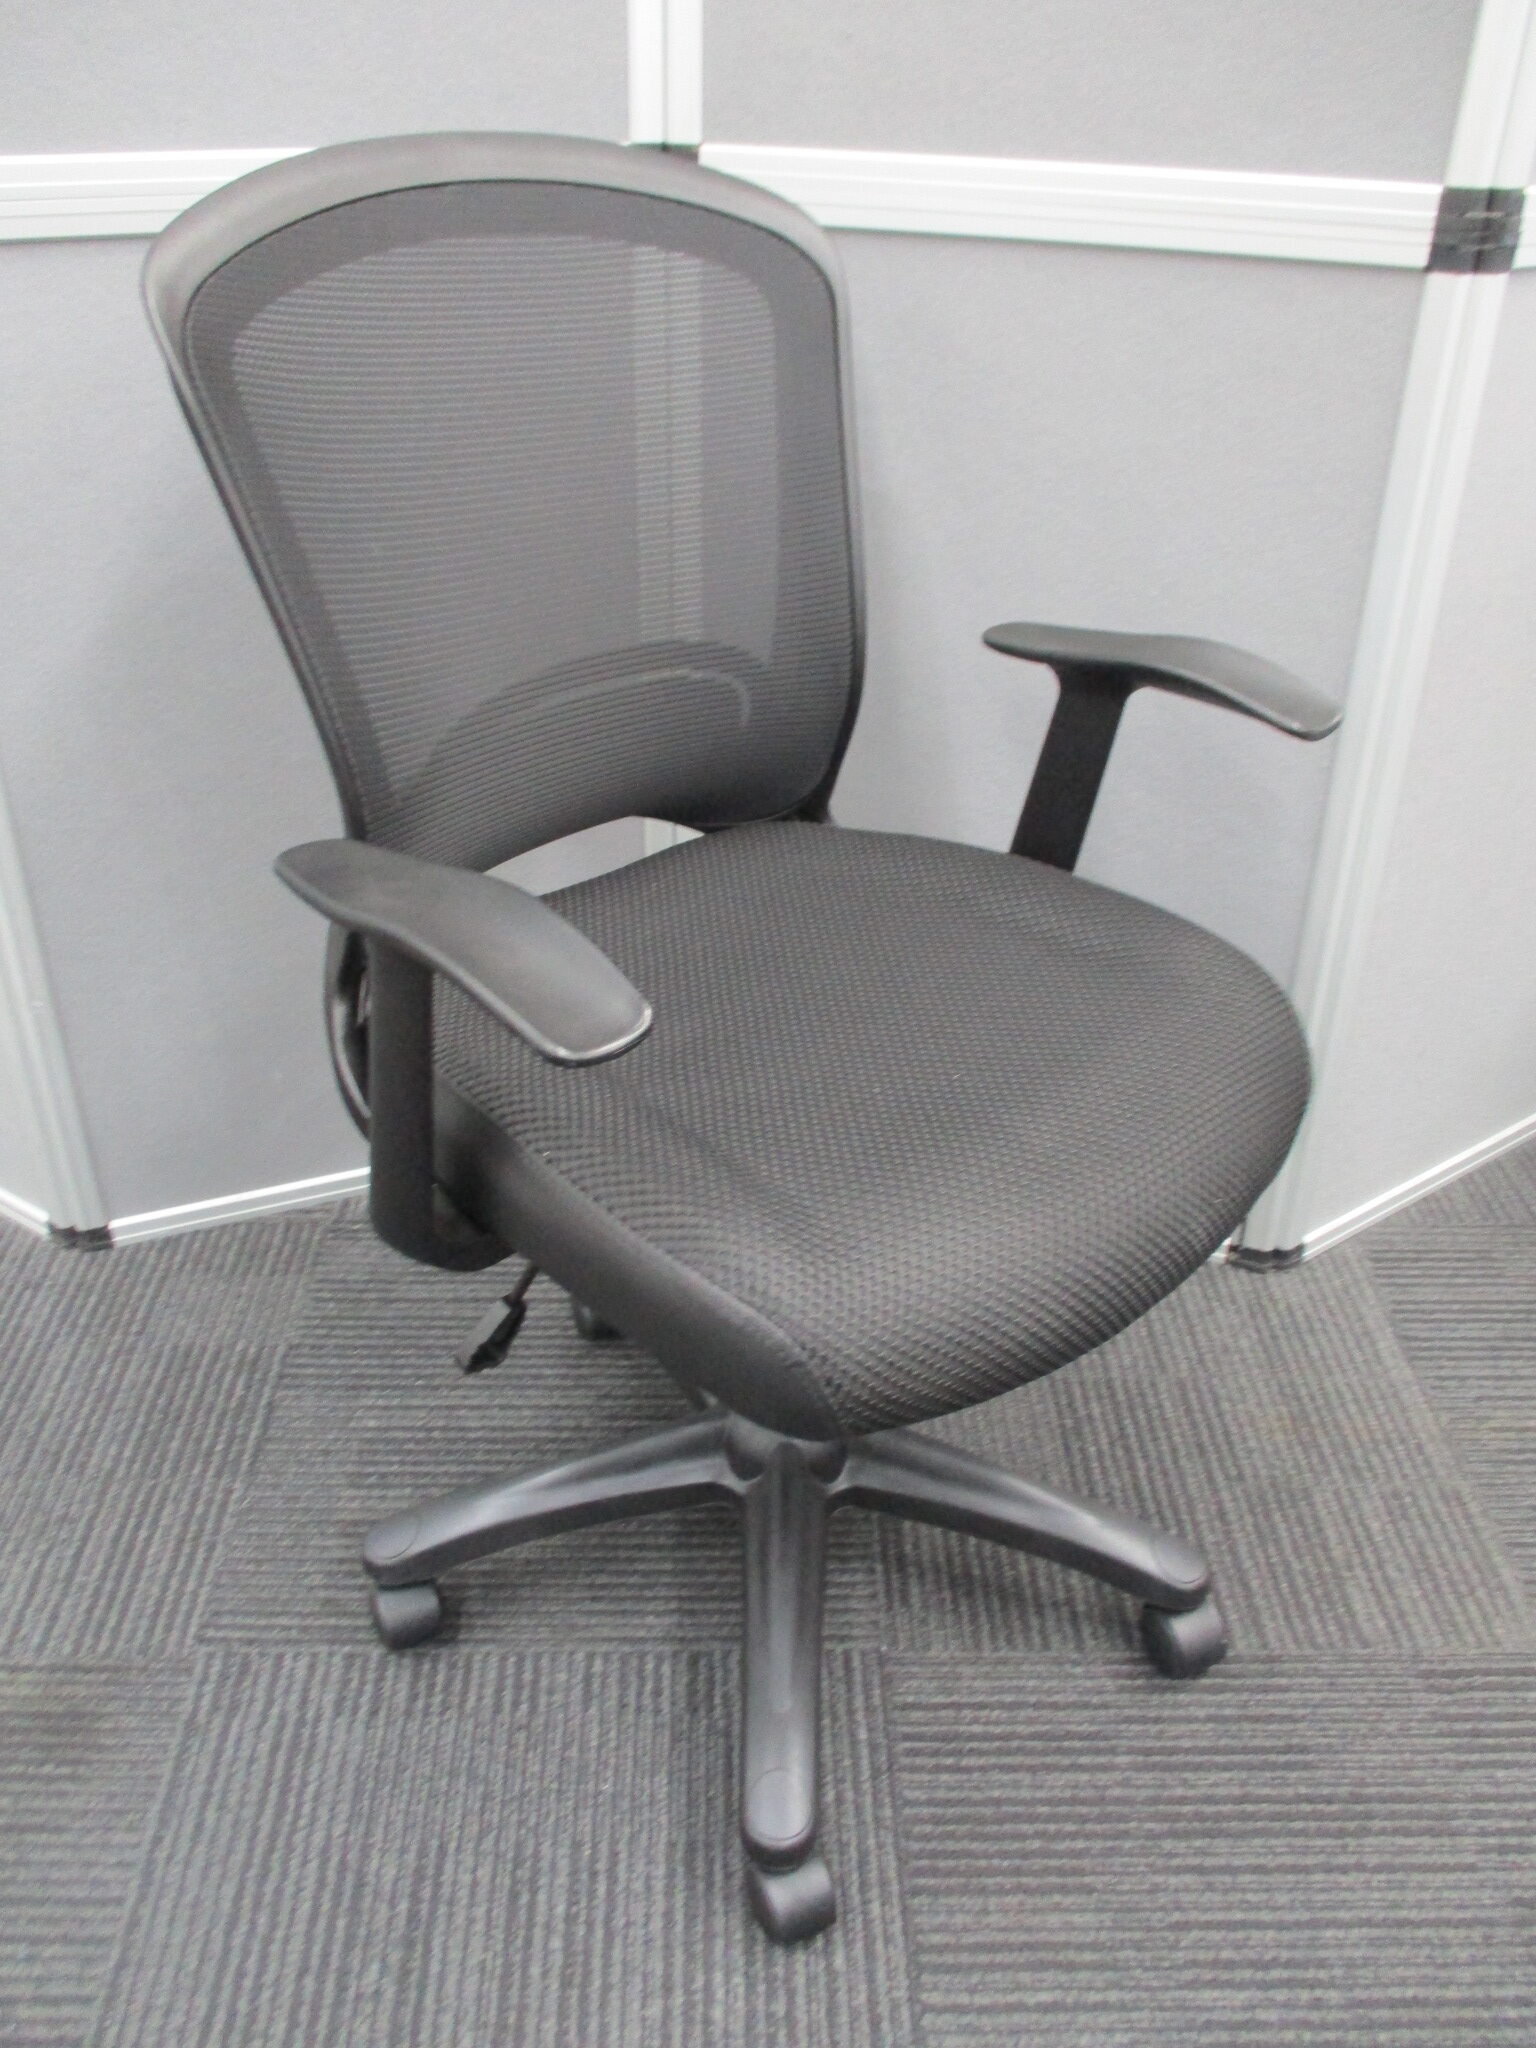 New Intro Chairs $190